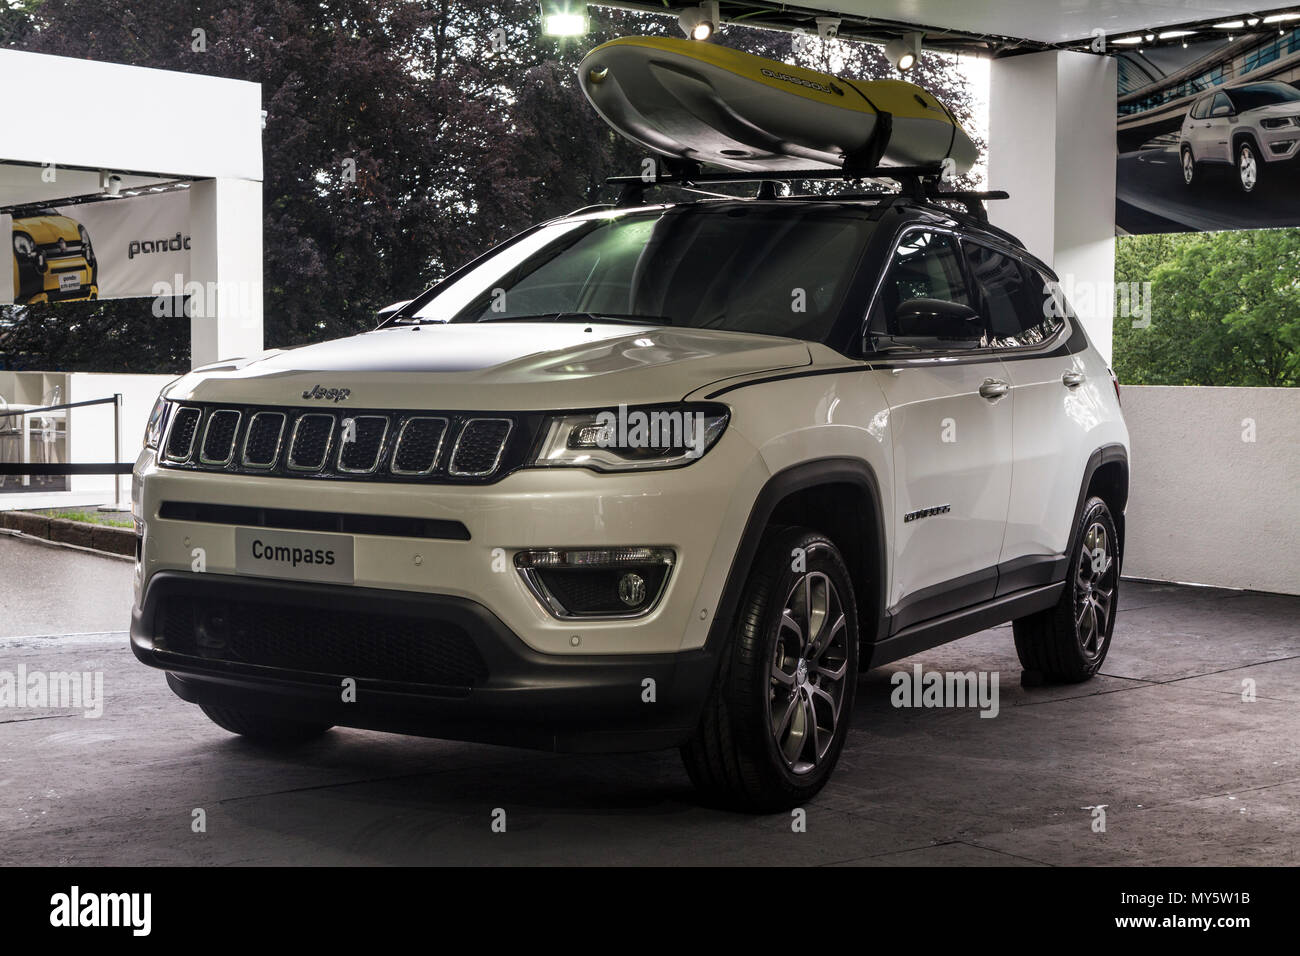 Torino, Italy. 6th June 2018. A Jeep Compass. 2018 edition of Parco Valentino car show hosts cars by many automobile manufacturers and car designers inside Valentino Park in Torino, Italy. Credit: Marco Destefanis/Alamy Live News Stock Photo